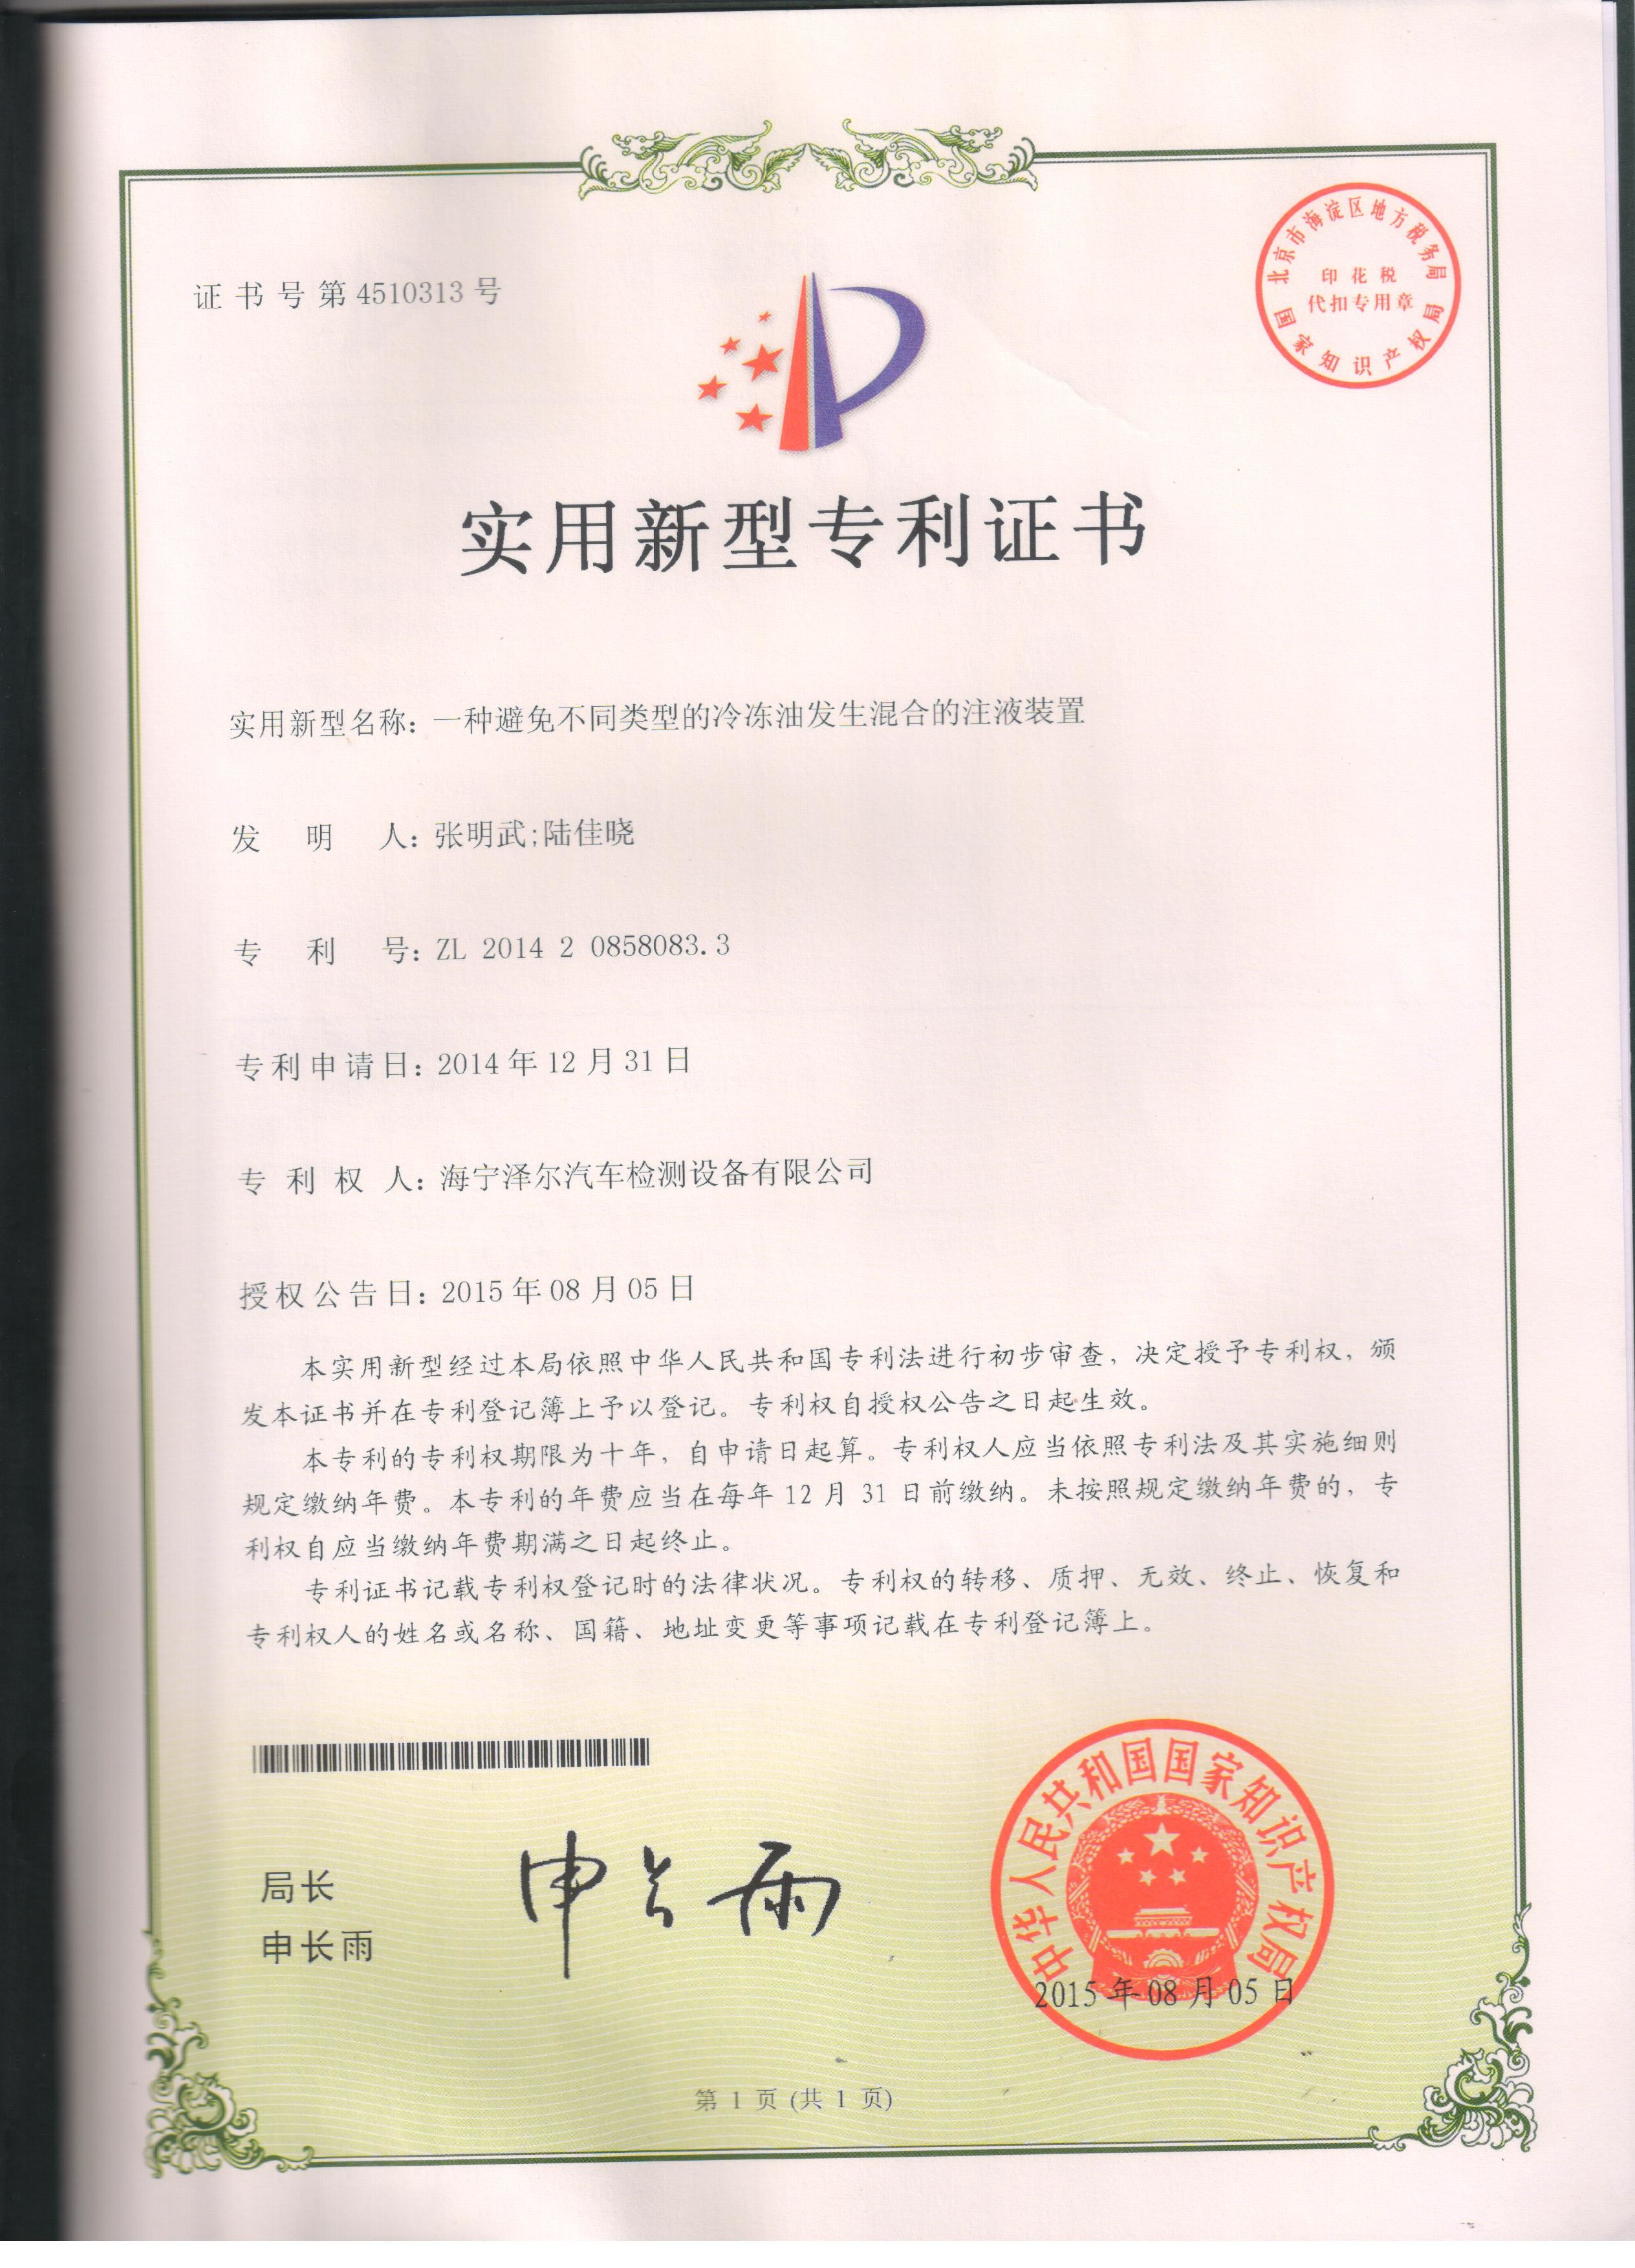 Haining Zell Automobile Testing And Inspection Equipments Co., Ltd. Certifications